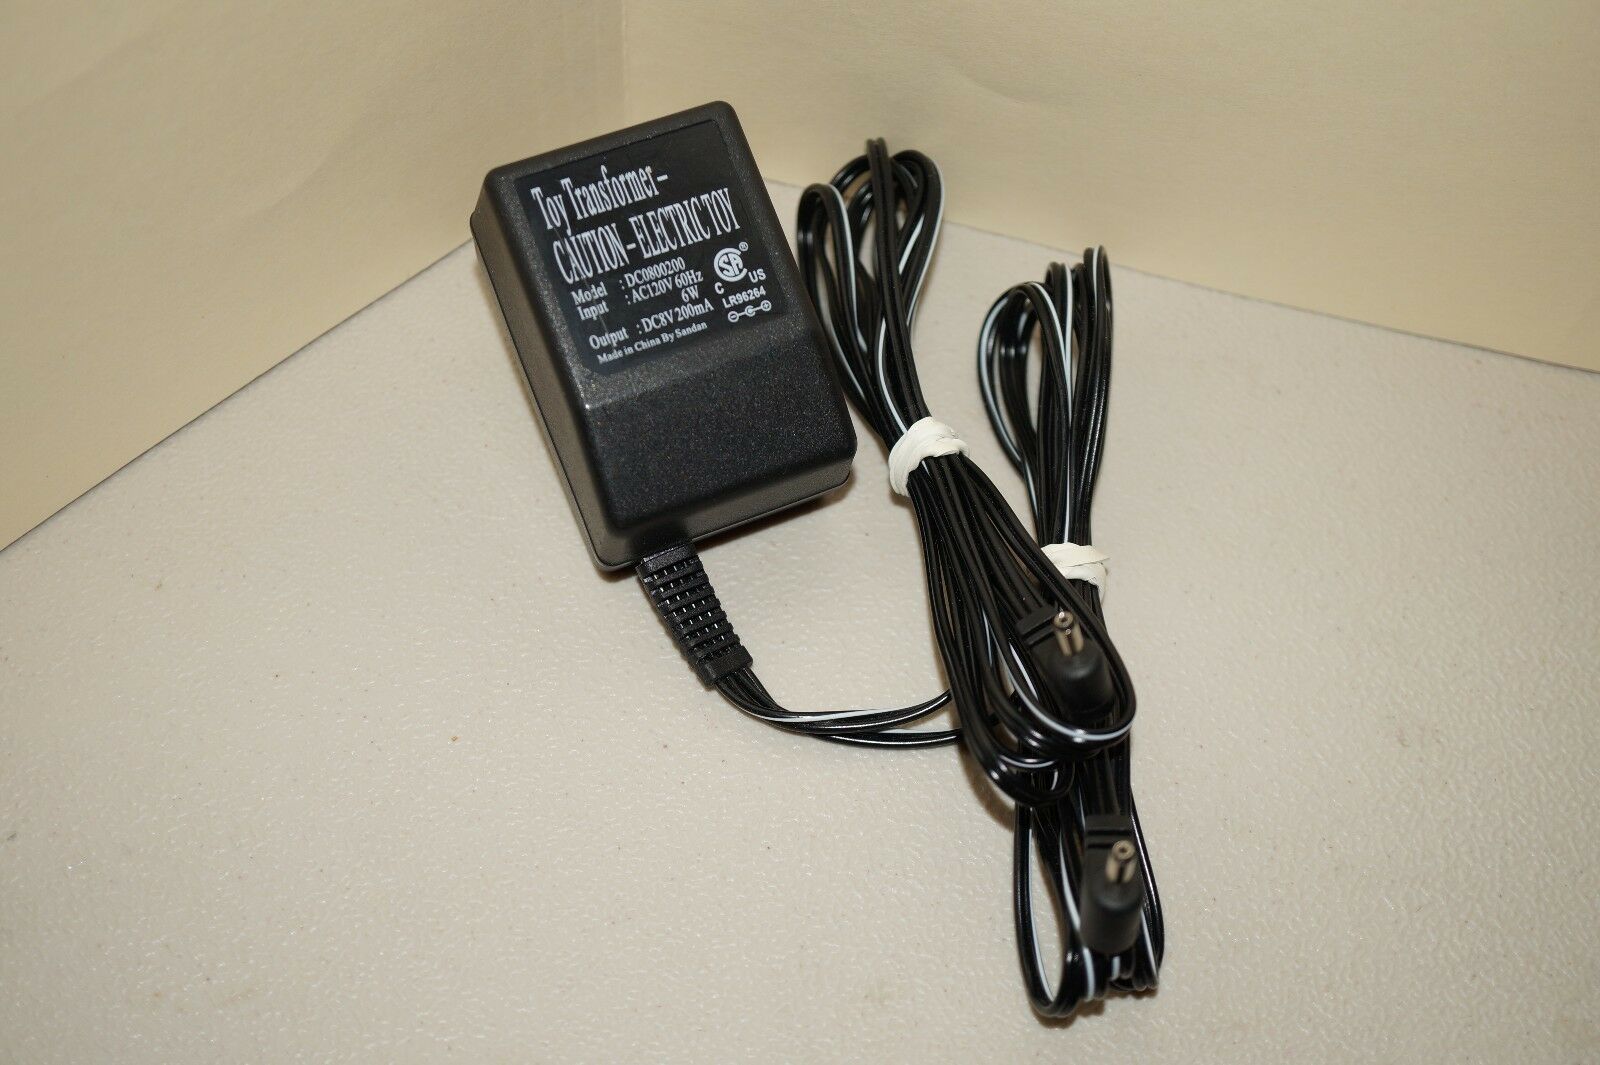 Sandan Toy Transformer AC Adapter for Electric Toy DC0800200 Brand: Sandan Model: DC0800200 MPN: DC0800200 Output - Click Image to Close